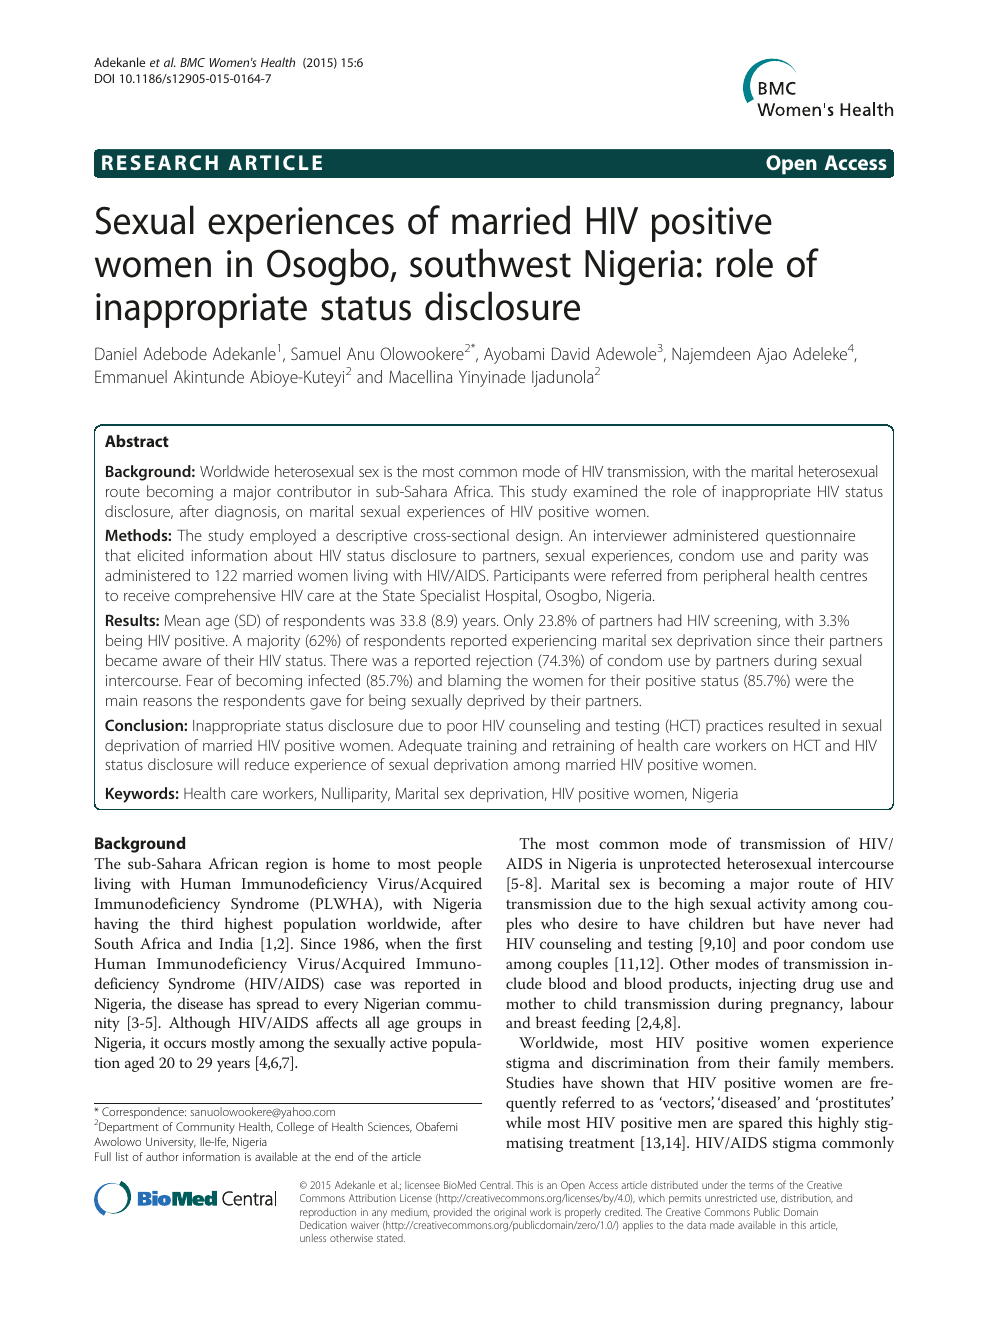 Sexual experiences of married HIV positive women in Osogbo, southwest Nigeria role of inappropriate status disclosure